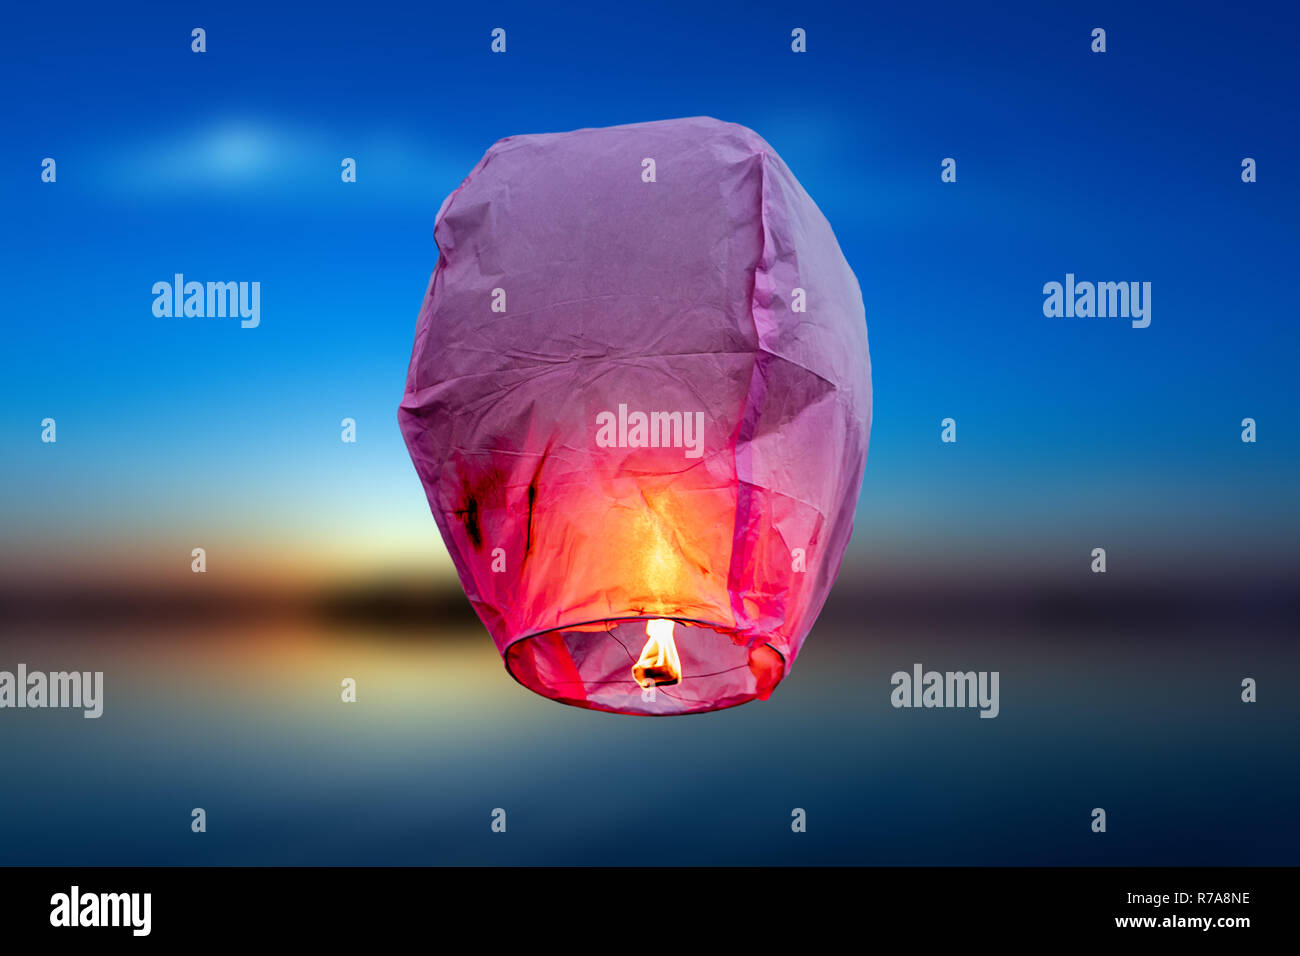 Balloon fire flying lanterns, hot-air balloons Lantern flies up highly in the sky. Stock Photo